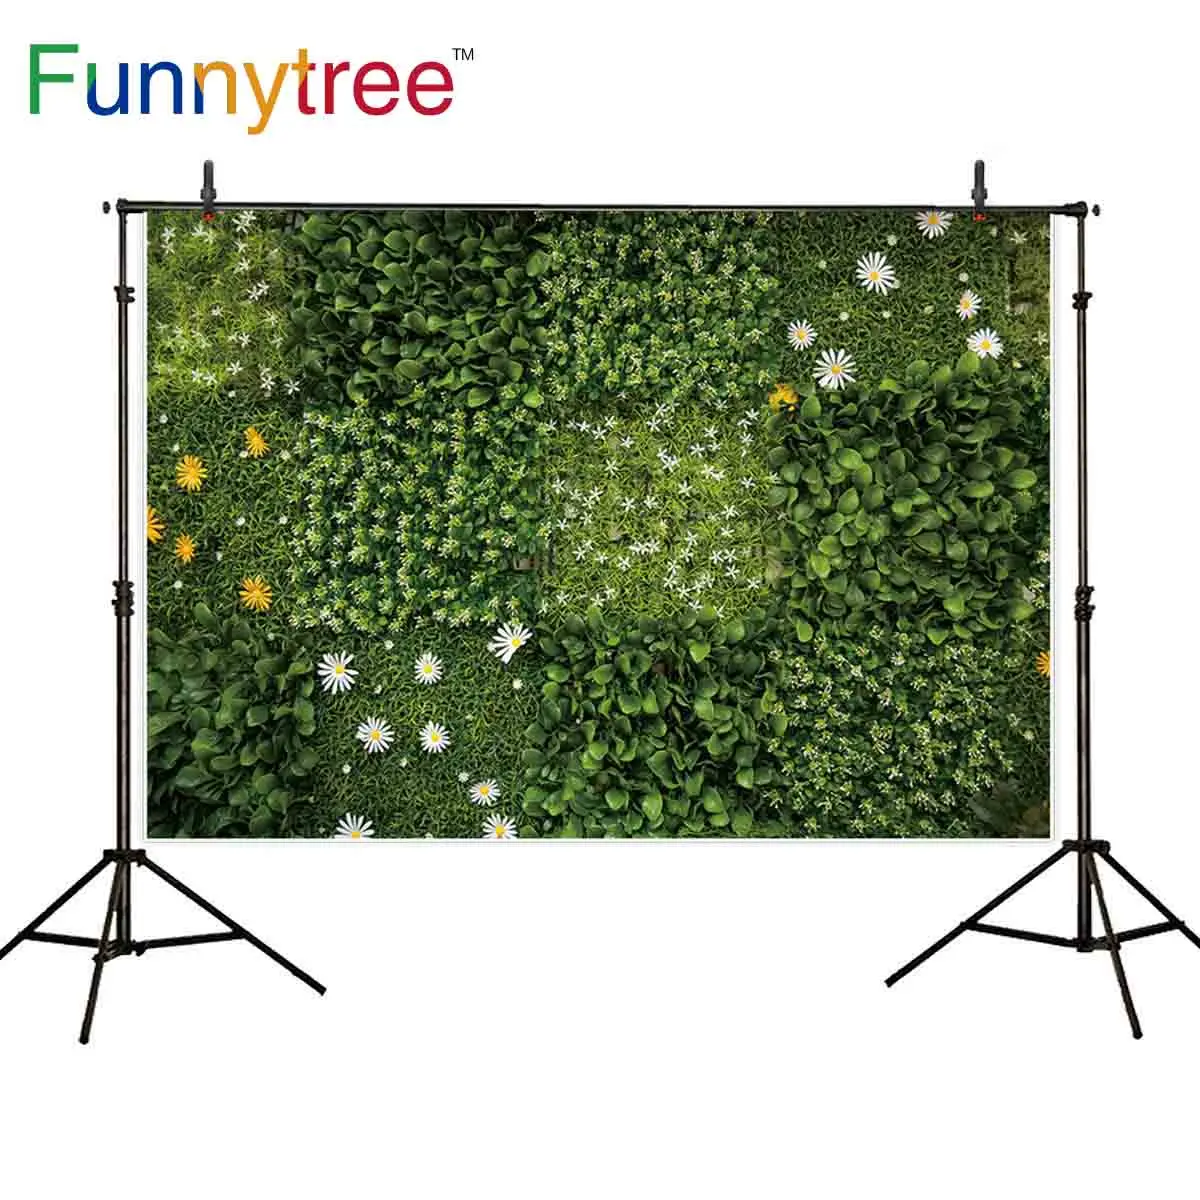 

Funnytree photography background square green lawn flower spring backdrop photobooth photophone photocall photo studio shoot